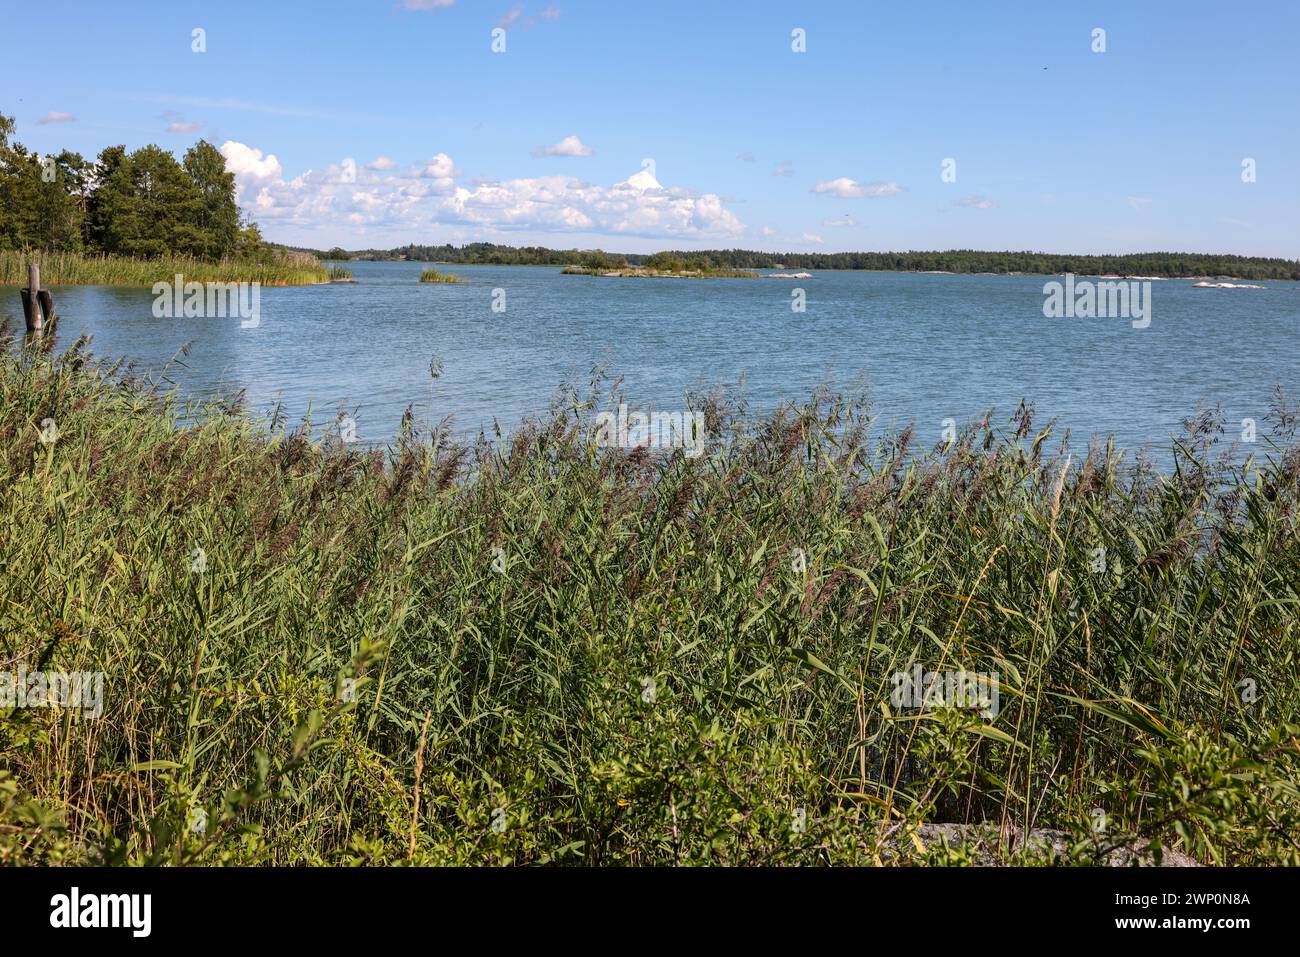 Trosa Havsbad in the Södermanland area, surrounded by magnificent archipelago views. Sweden. Stock Photo